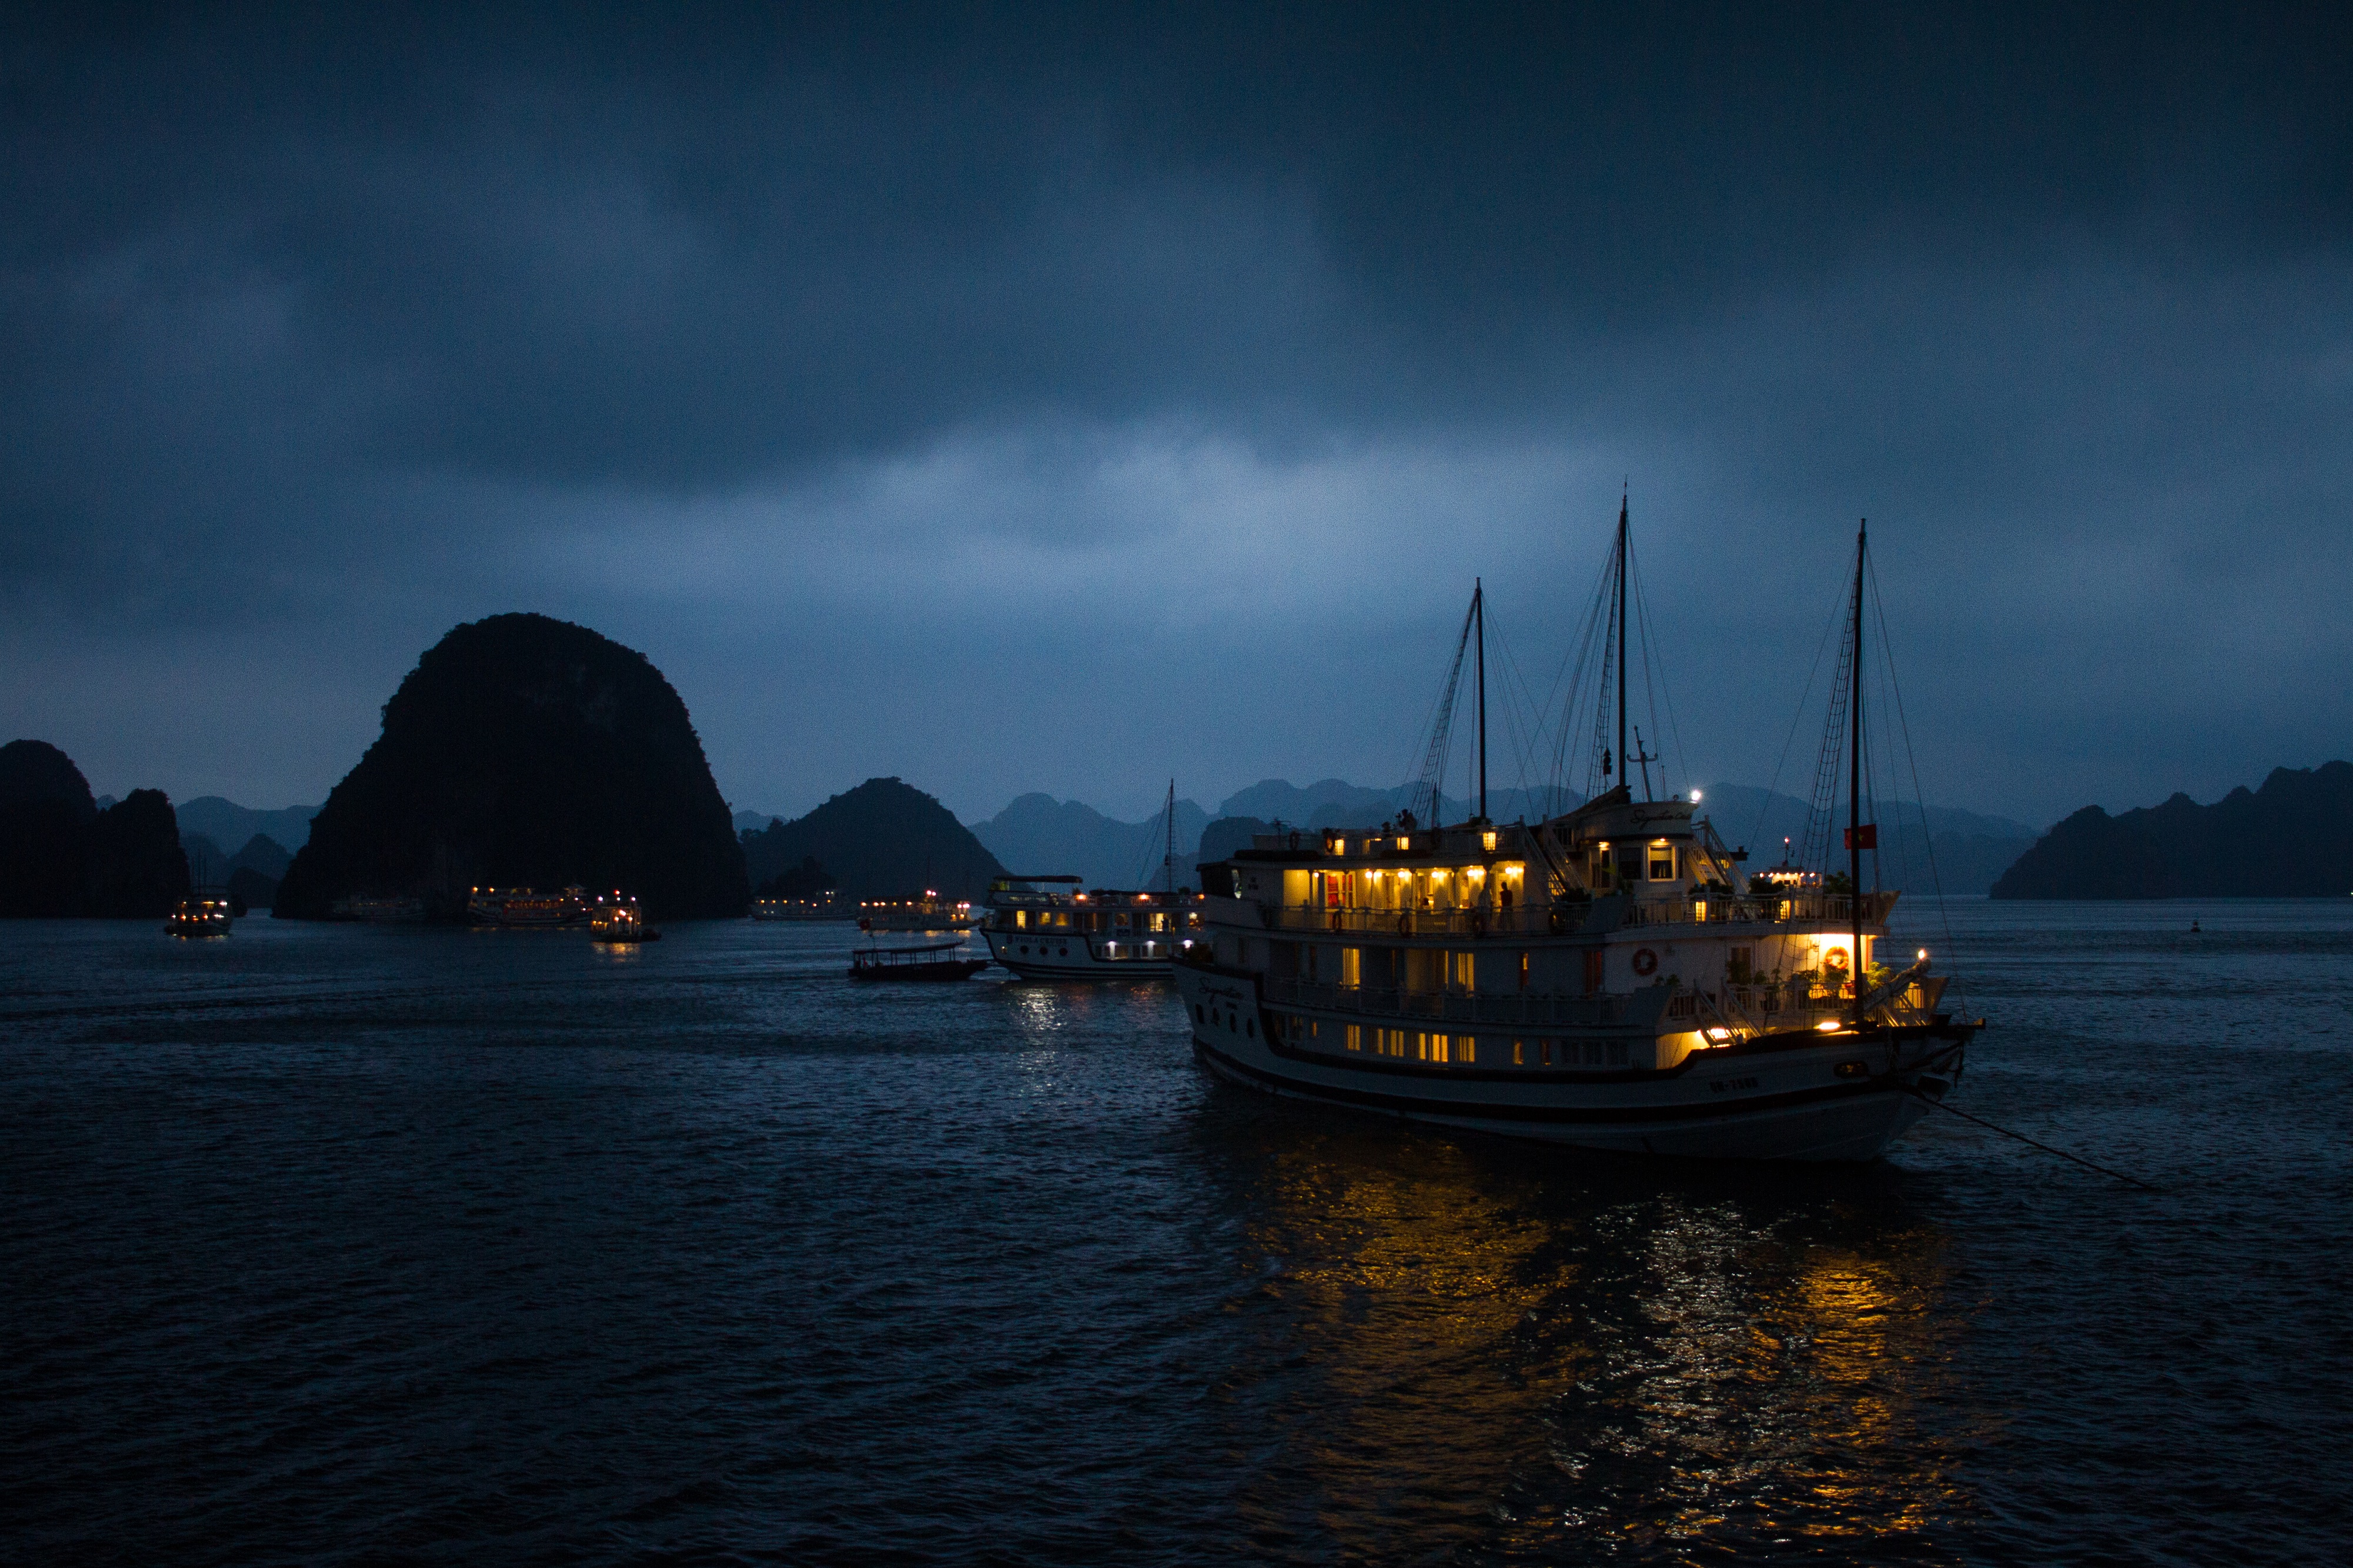 Before the storm: Halong Bay, Vietnam